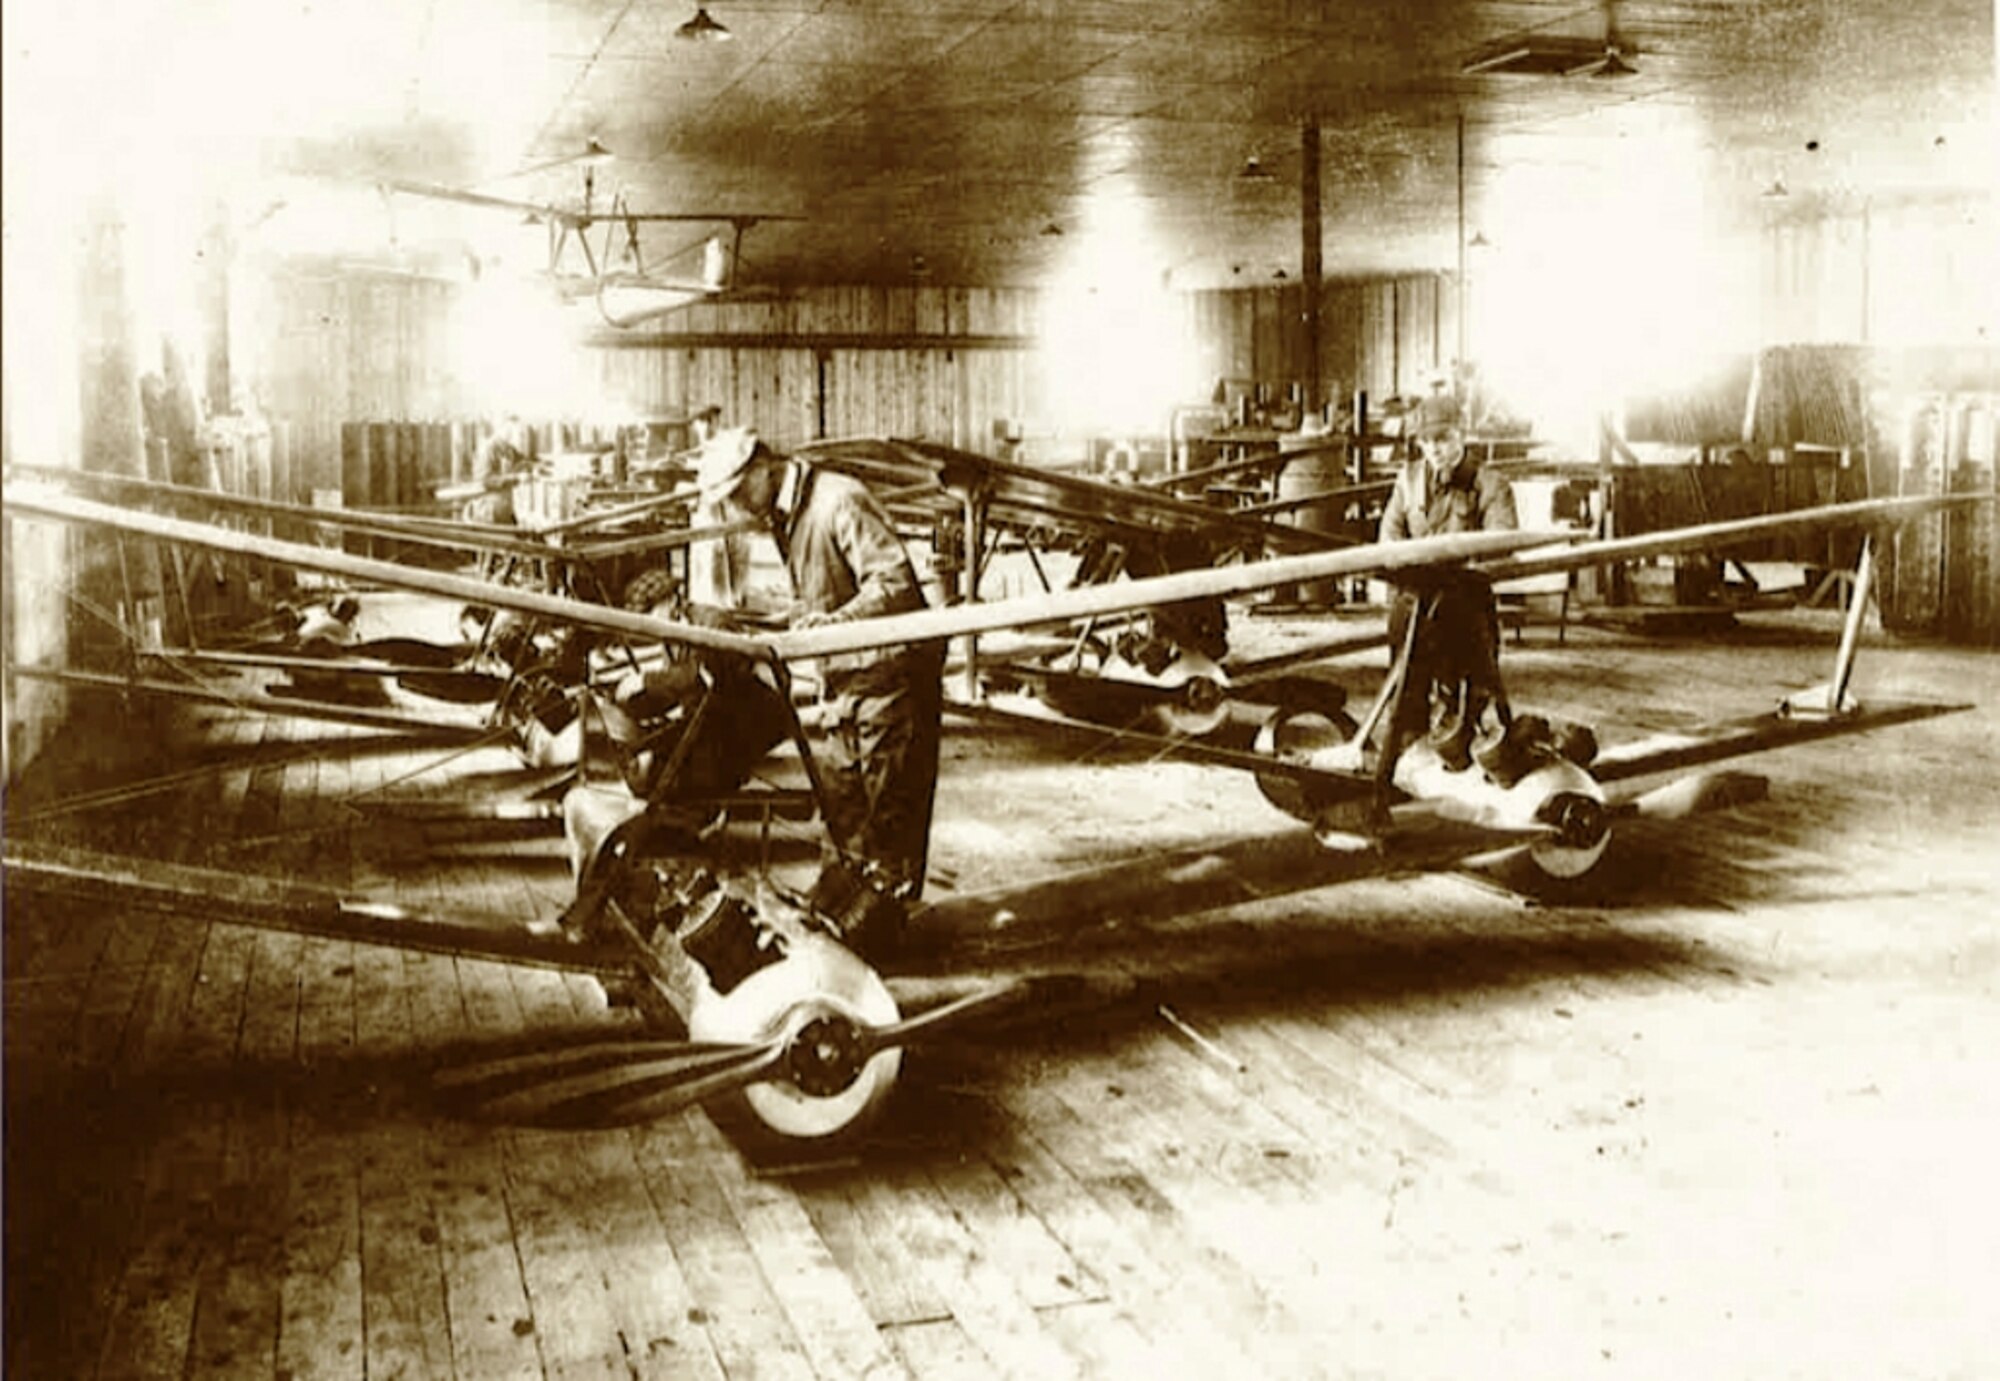 Workers assemble the “Liberty Eagle” aircraft at a factory in 1918.  

